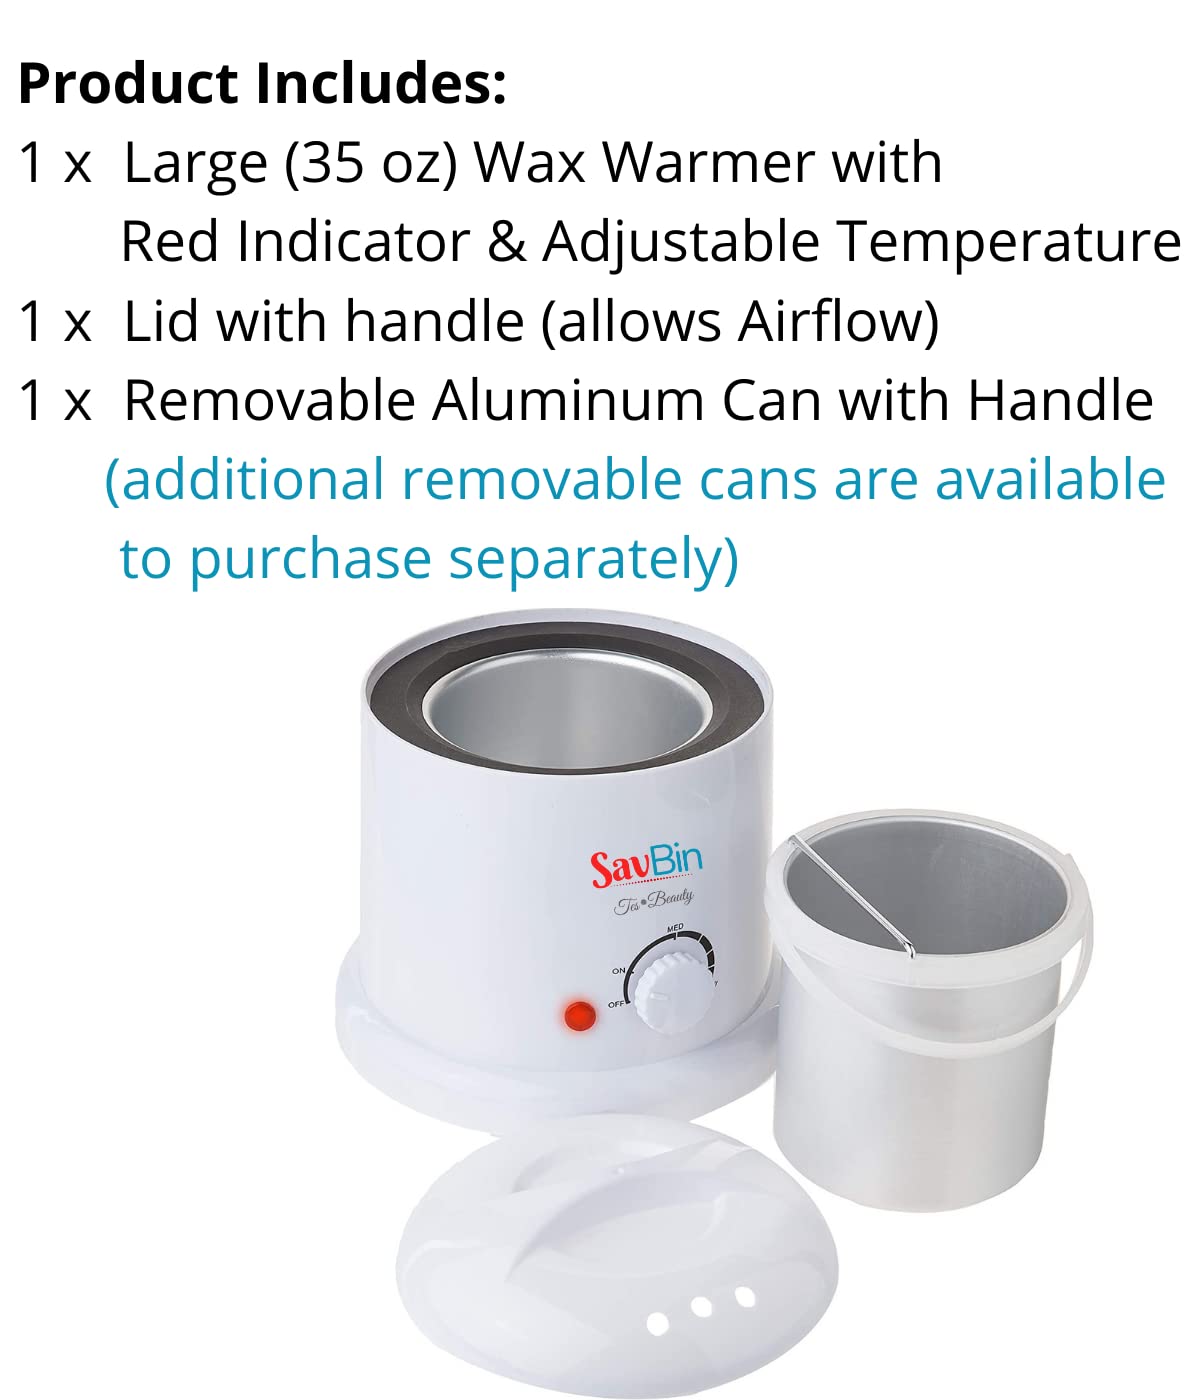 Wax Warmers and Replacement Pots (33 OZ WARMER (1000 ML))